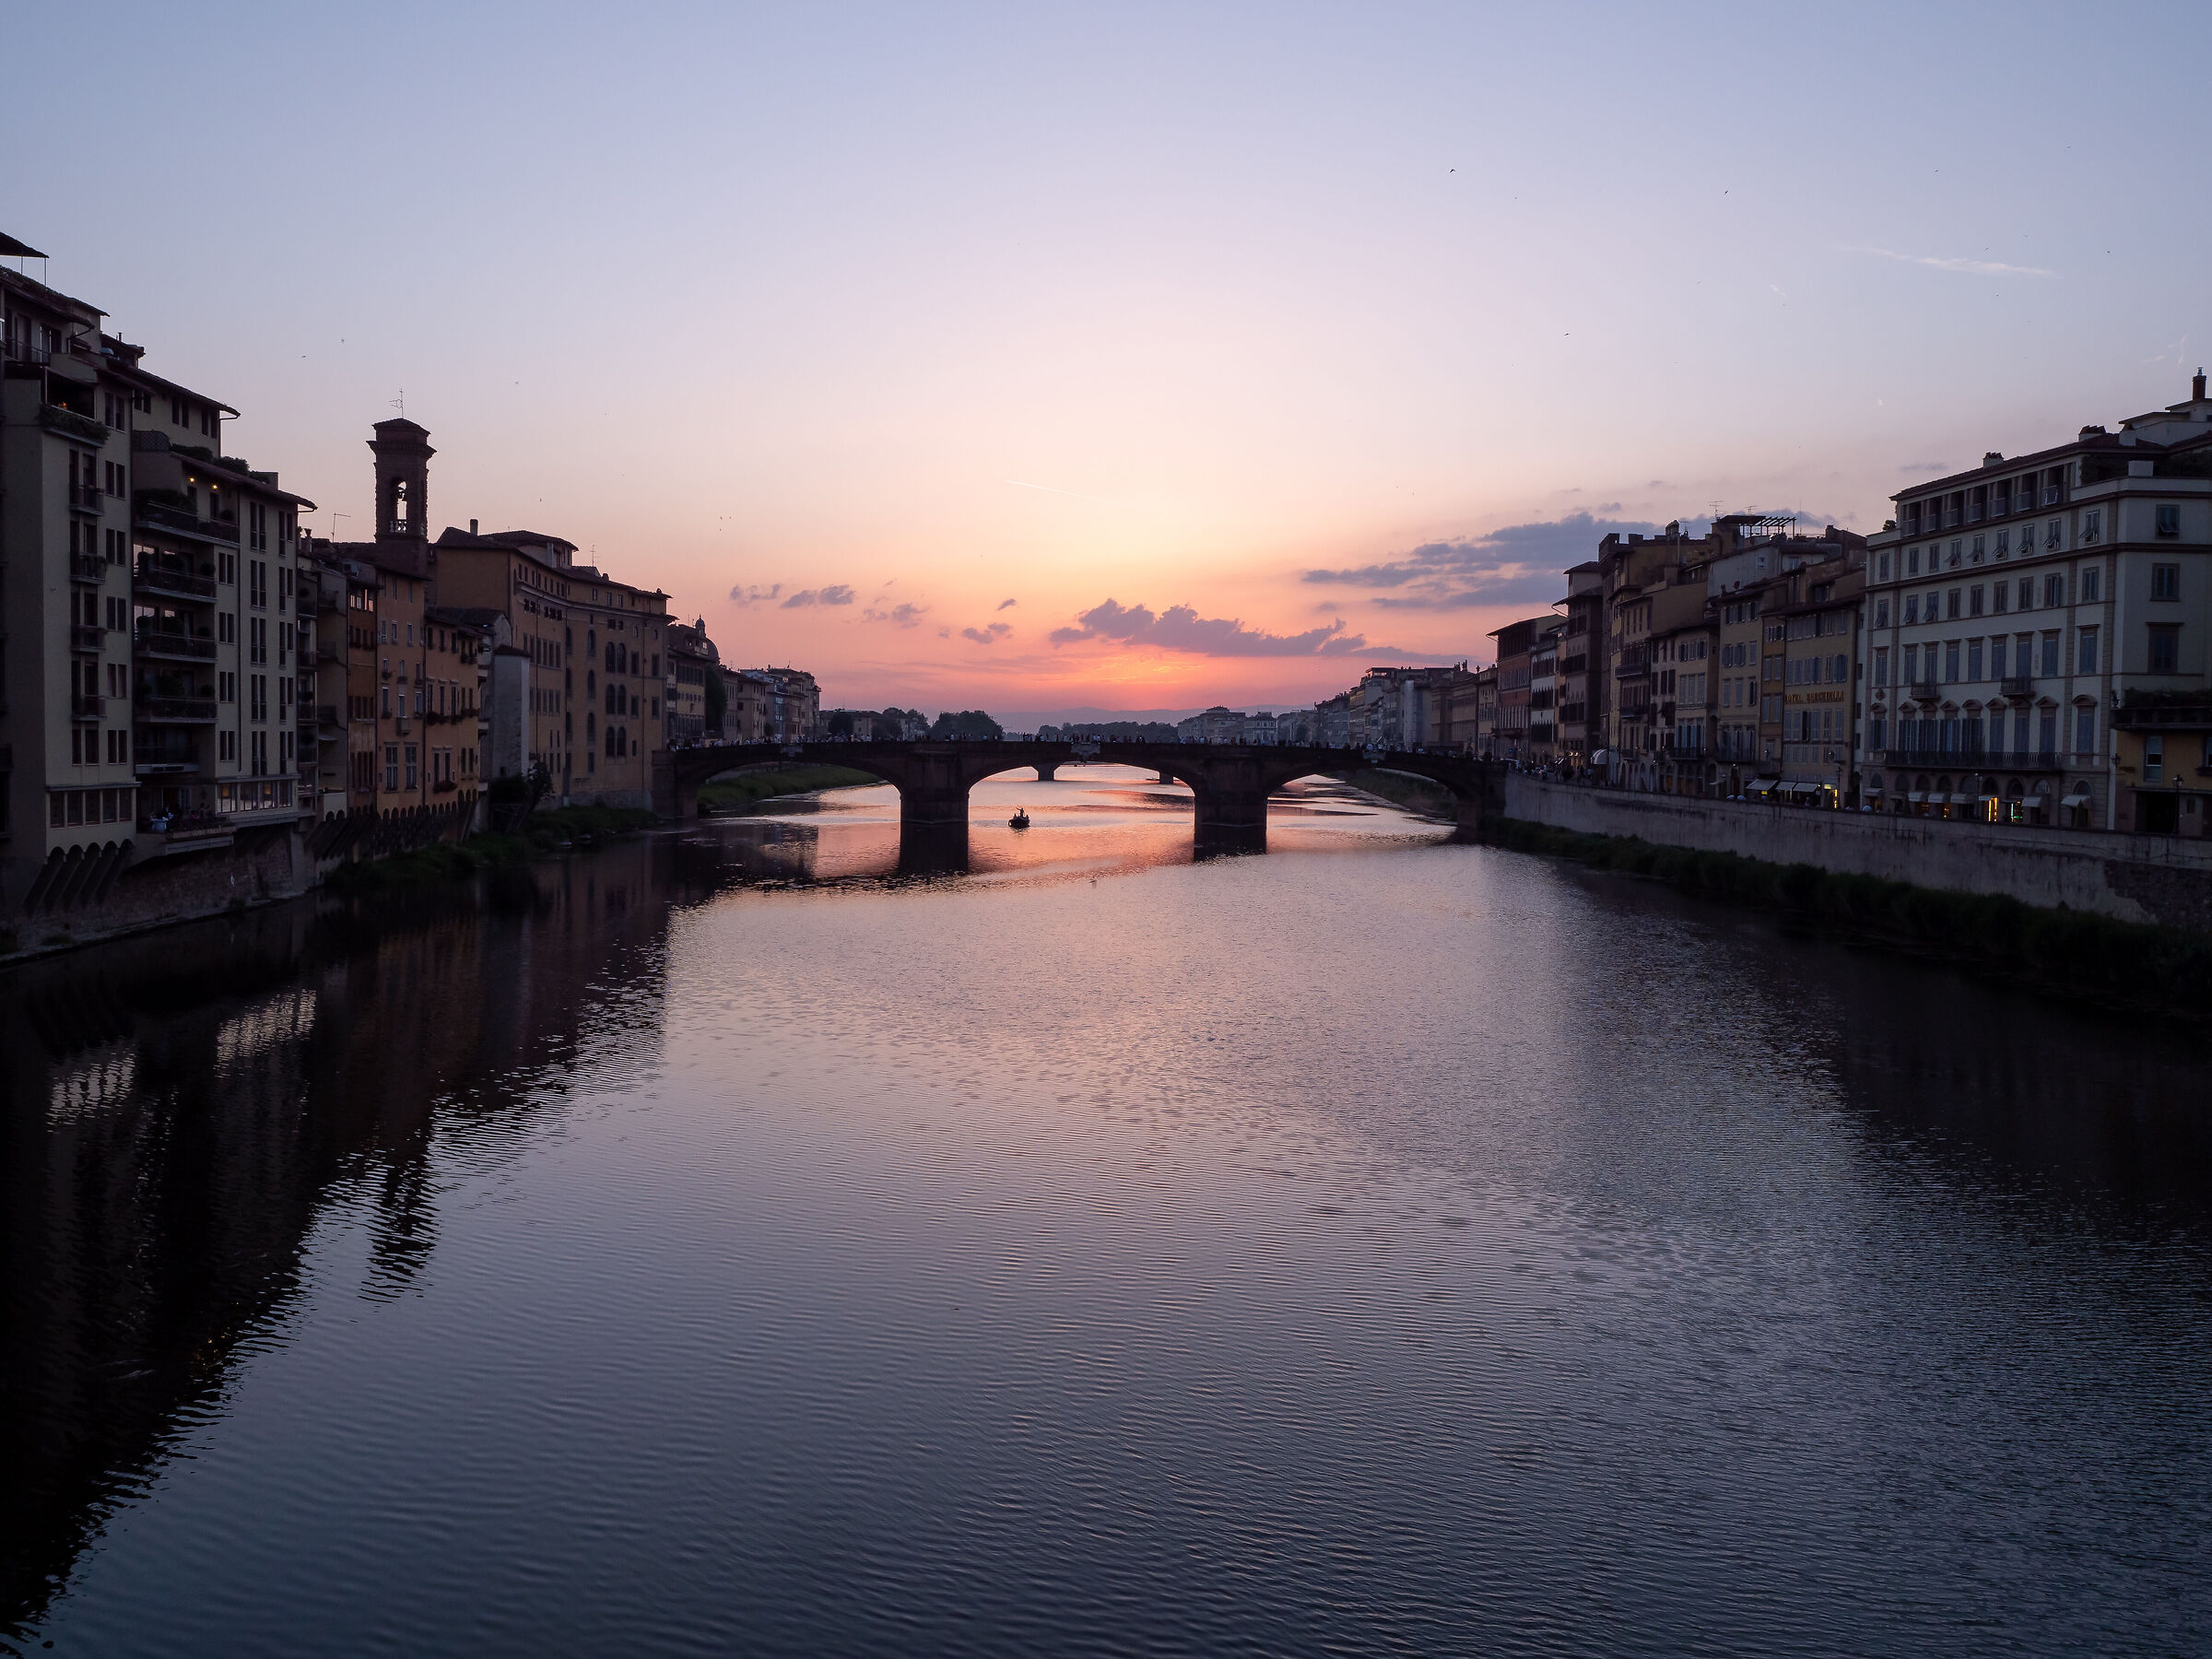 The Arno at sunset...